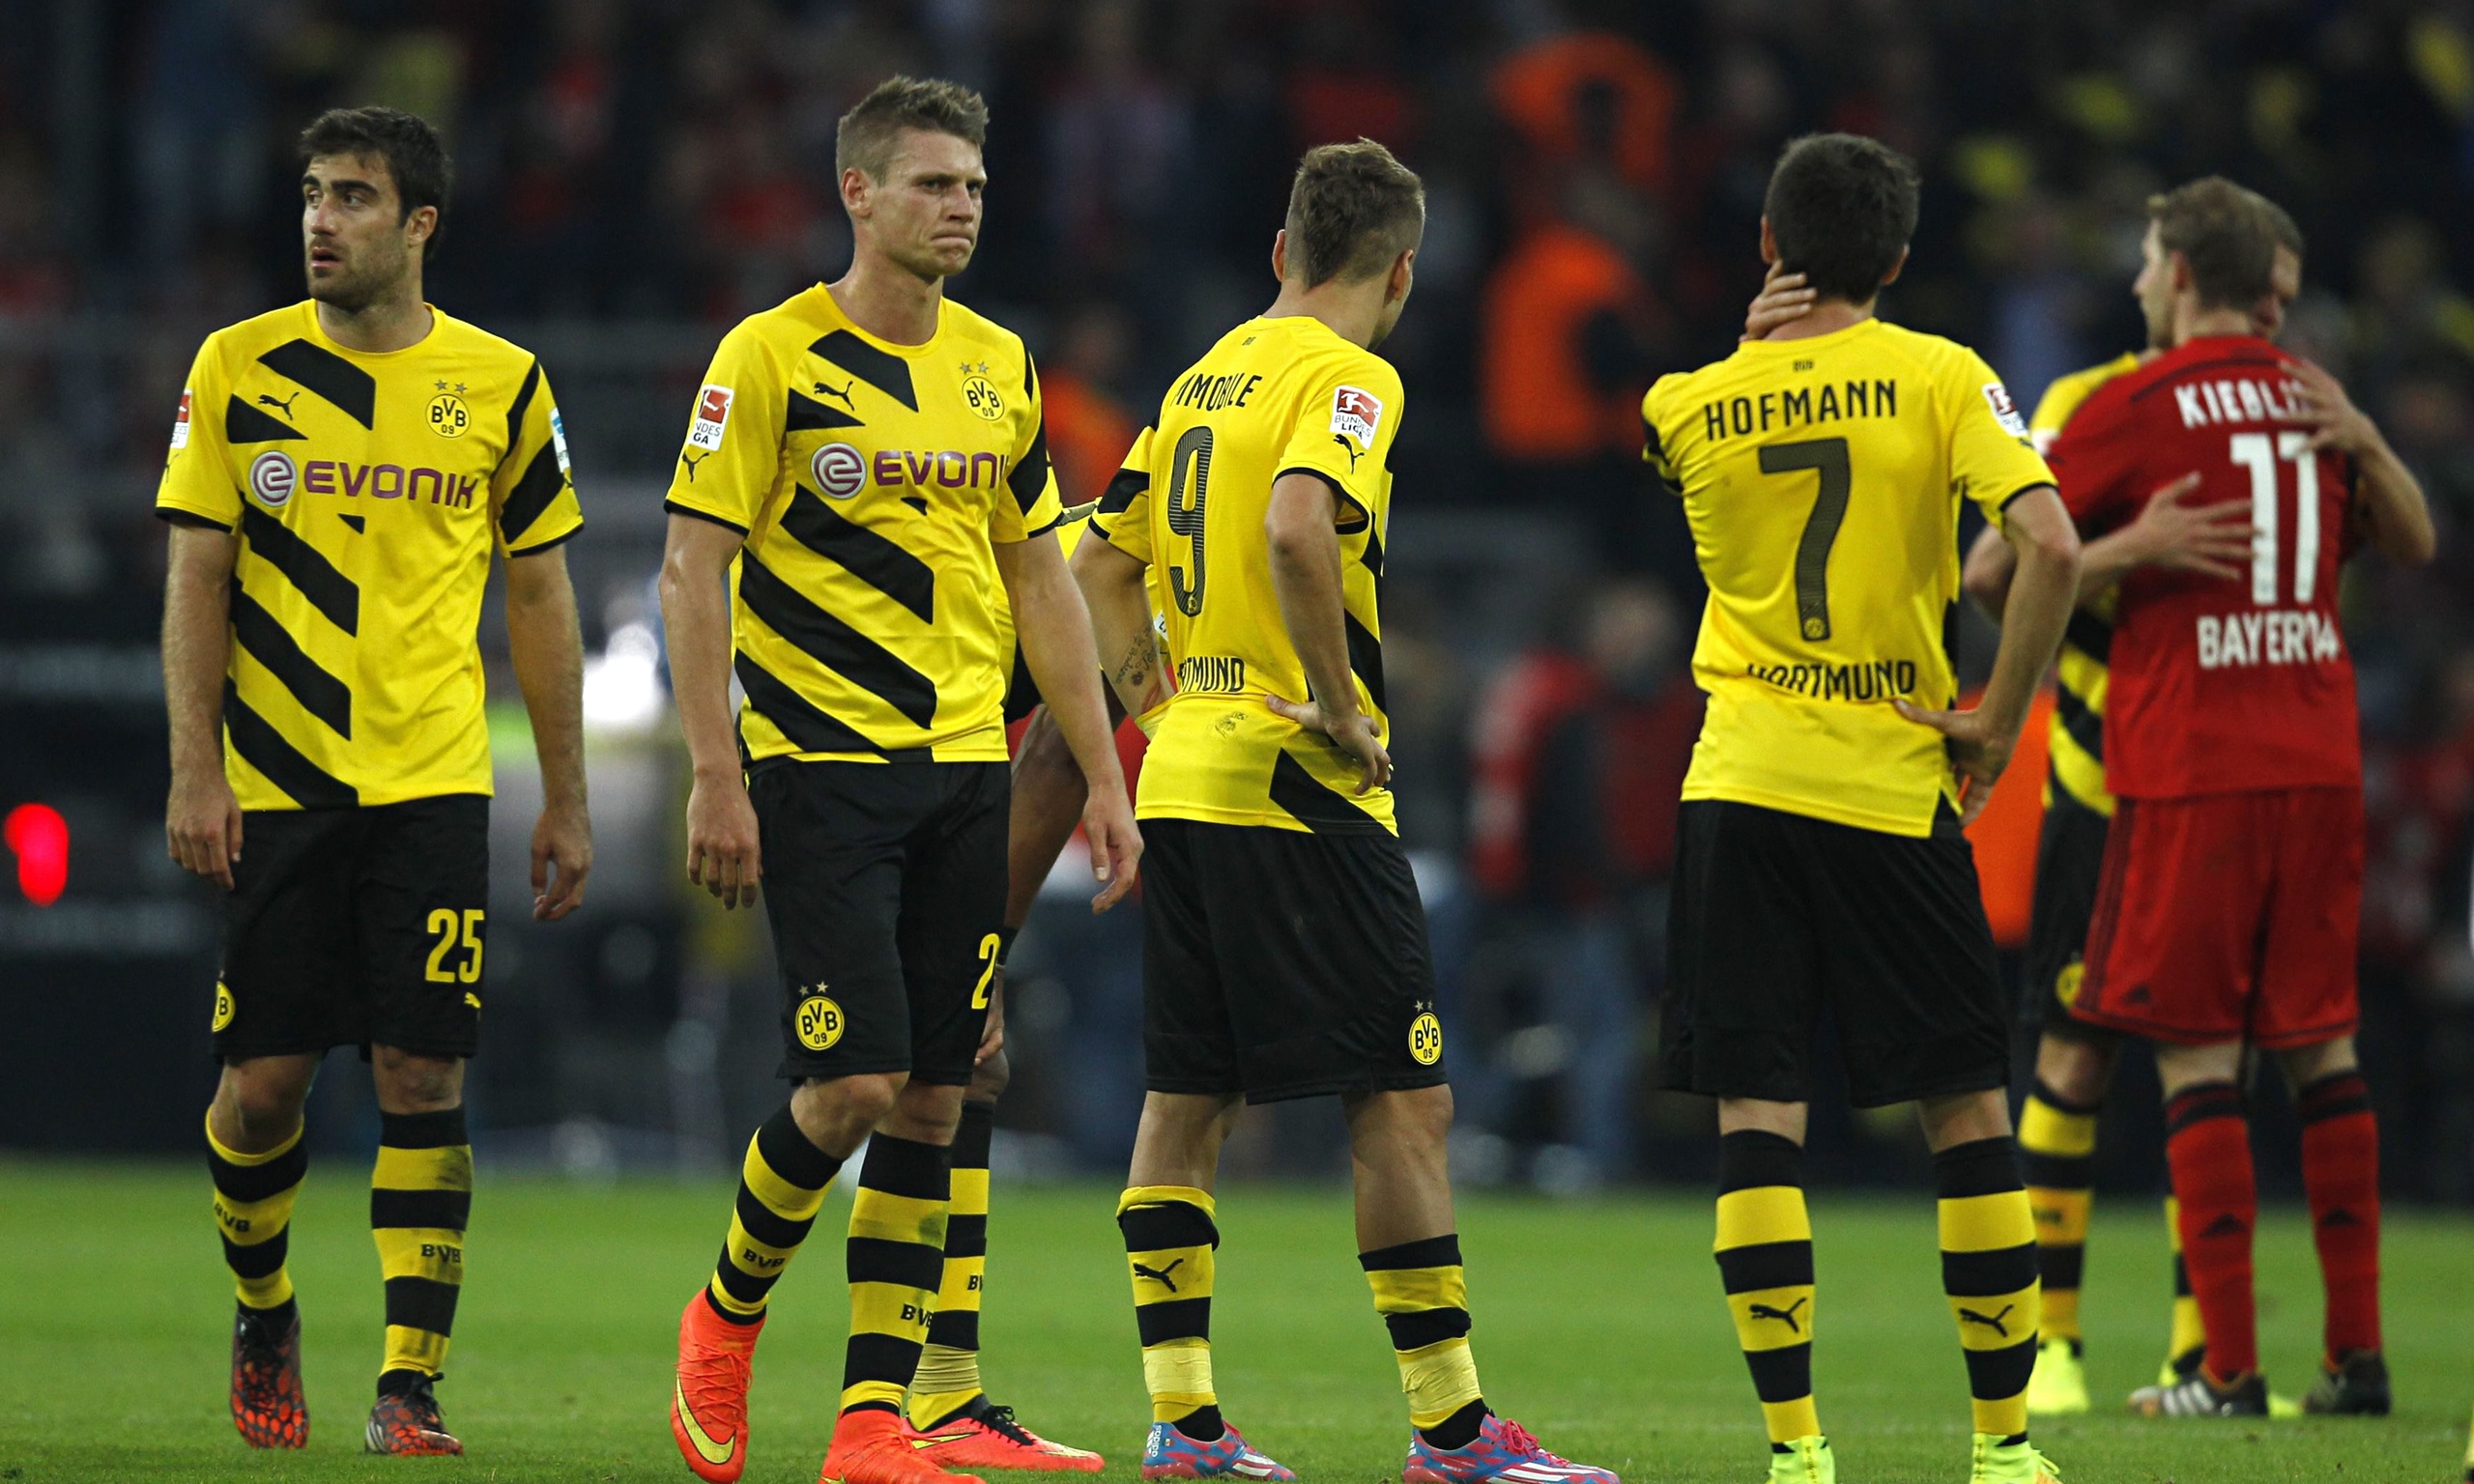 Borussia Dortmund - What's gone wrong?